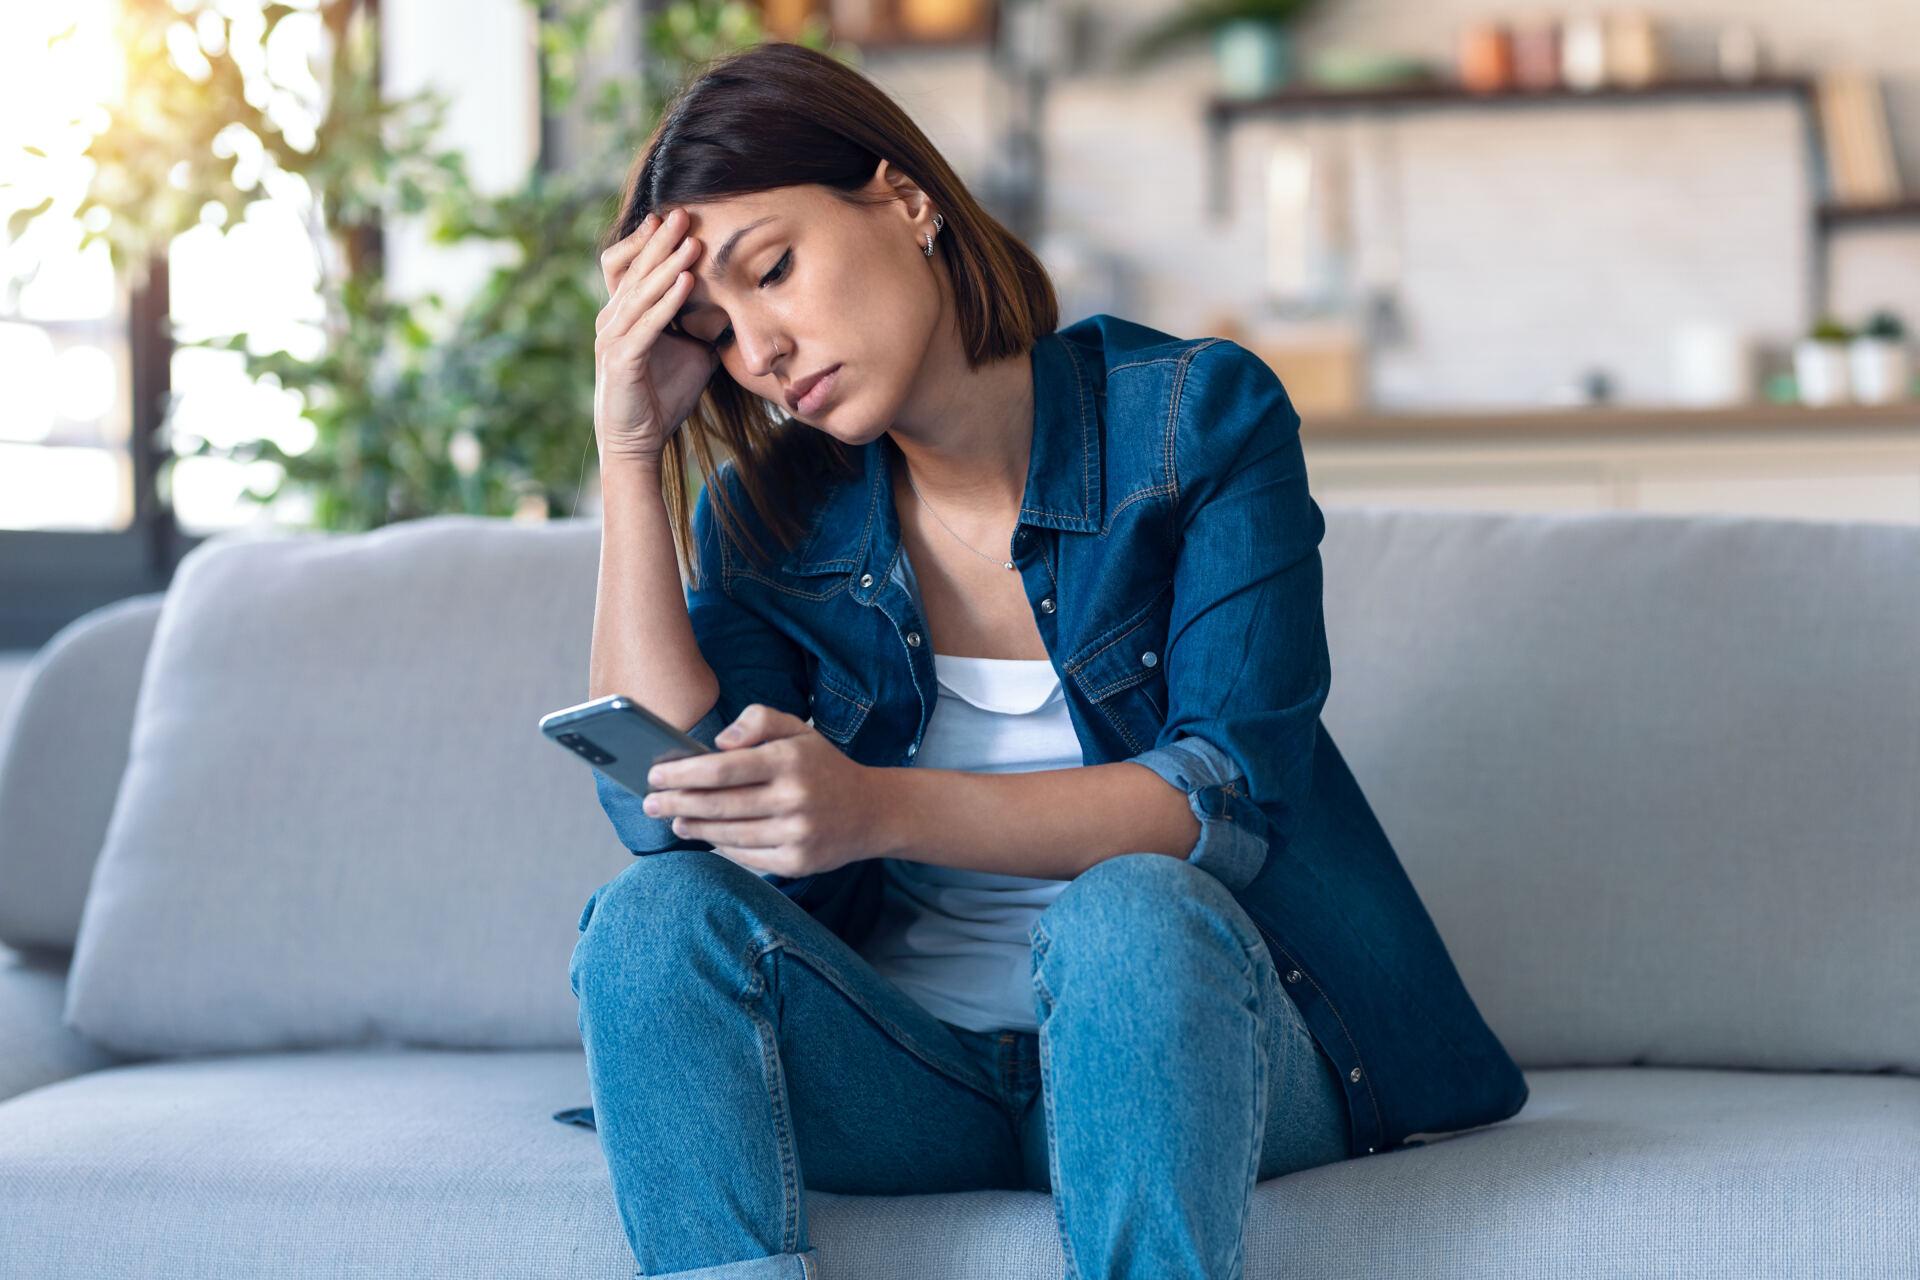 How much time is your business losing to robocalls: worried person using their mobile phone while thinking about problems sitting on couch in the living room at home